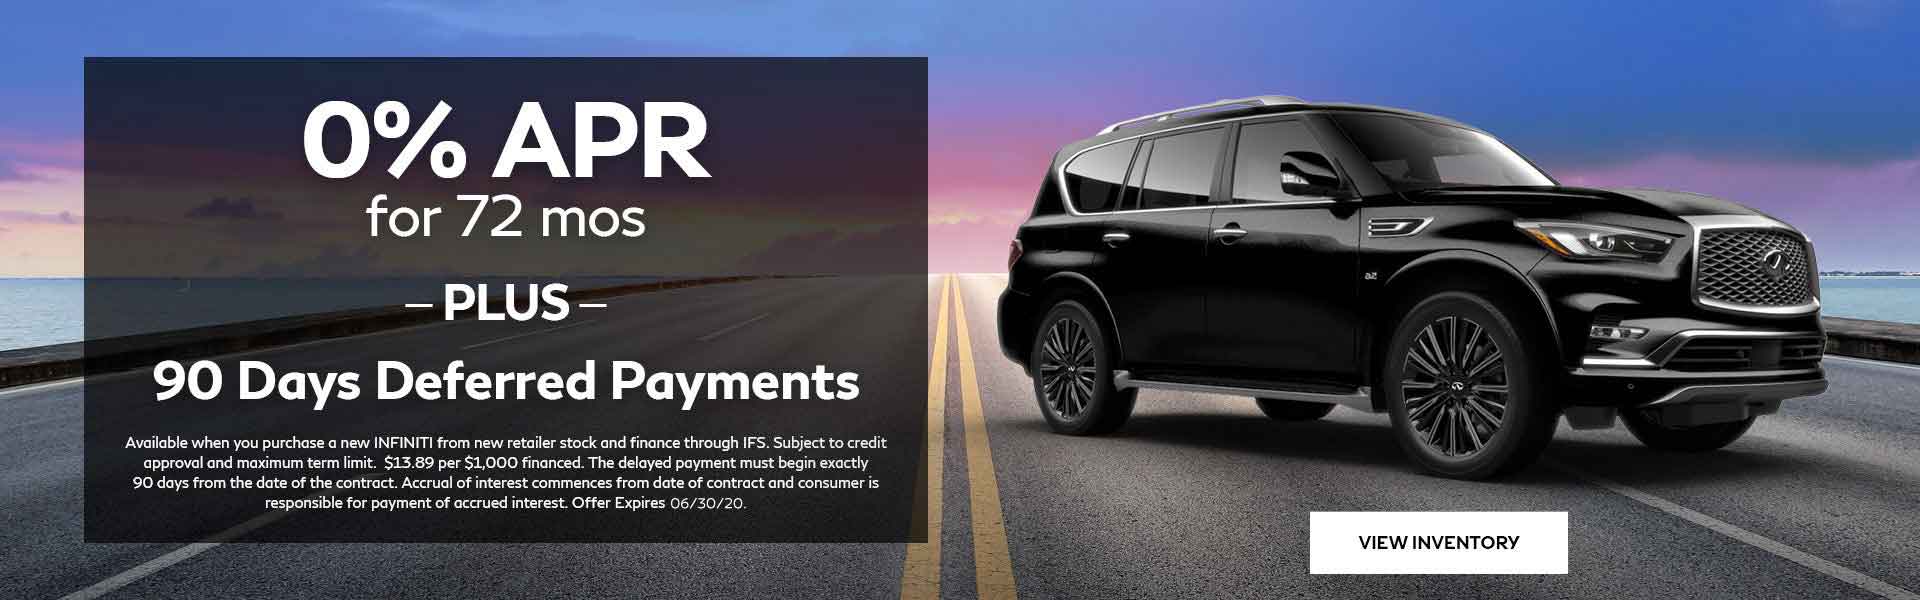 0% APR for 72 mos PLUS 90 Days Deferred Payments